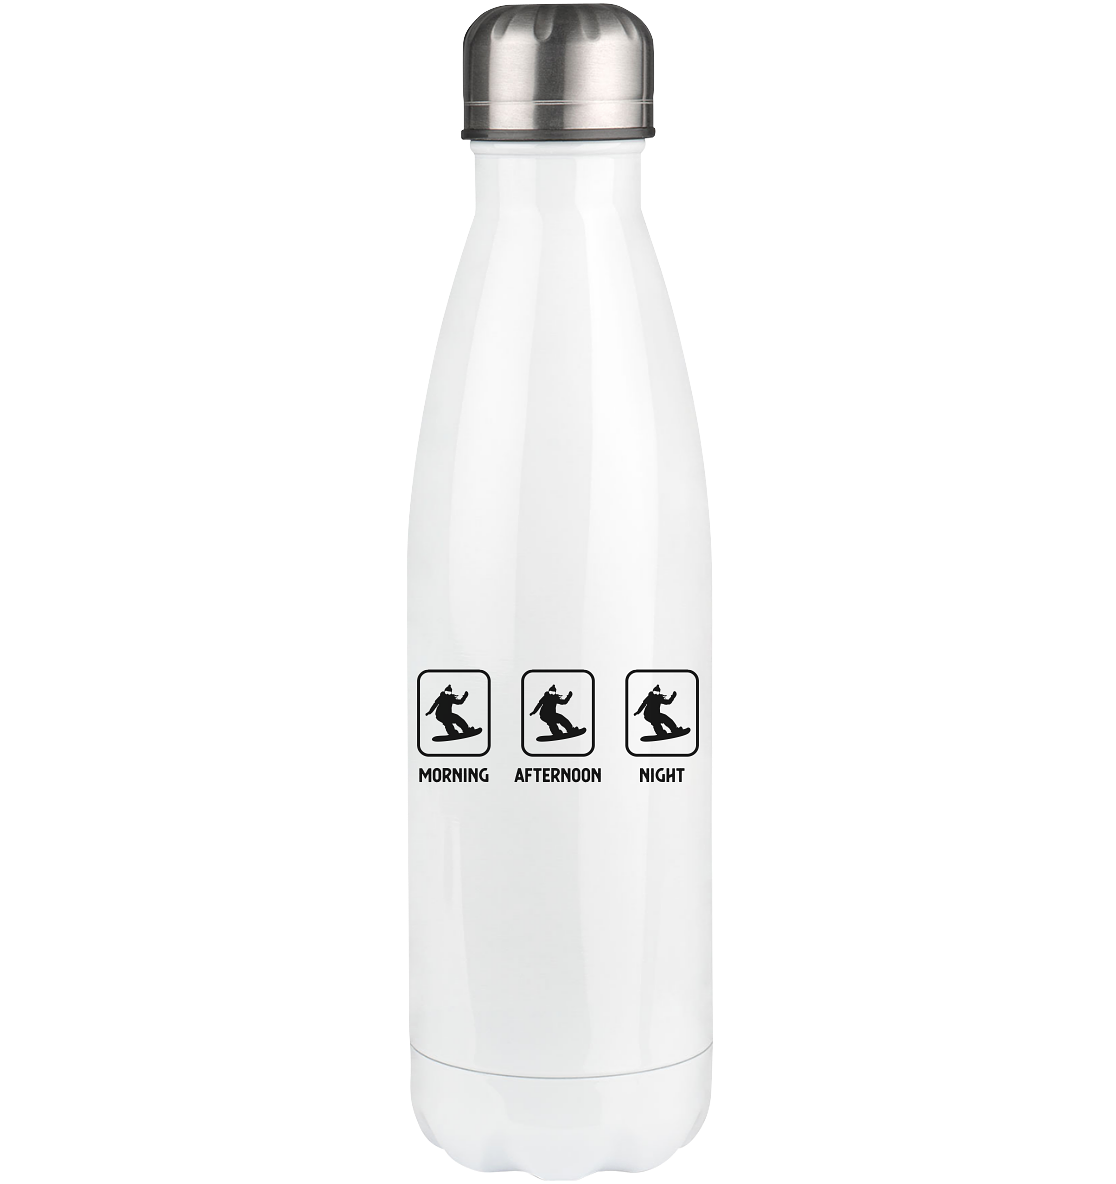 Morning Afternoon Night and Snowboarding 1 - Edelstahl Thermosflasche snowboarden 500ml